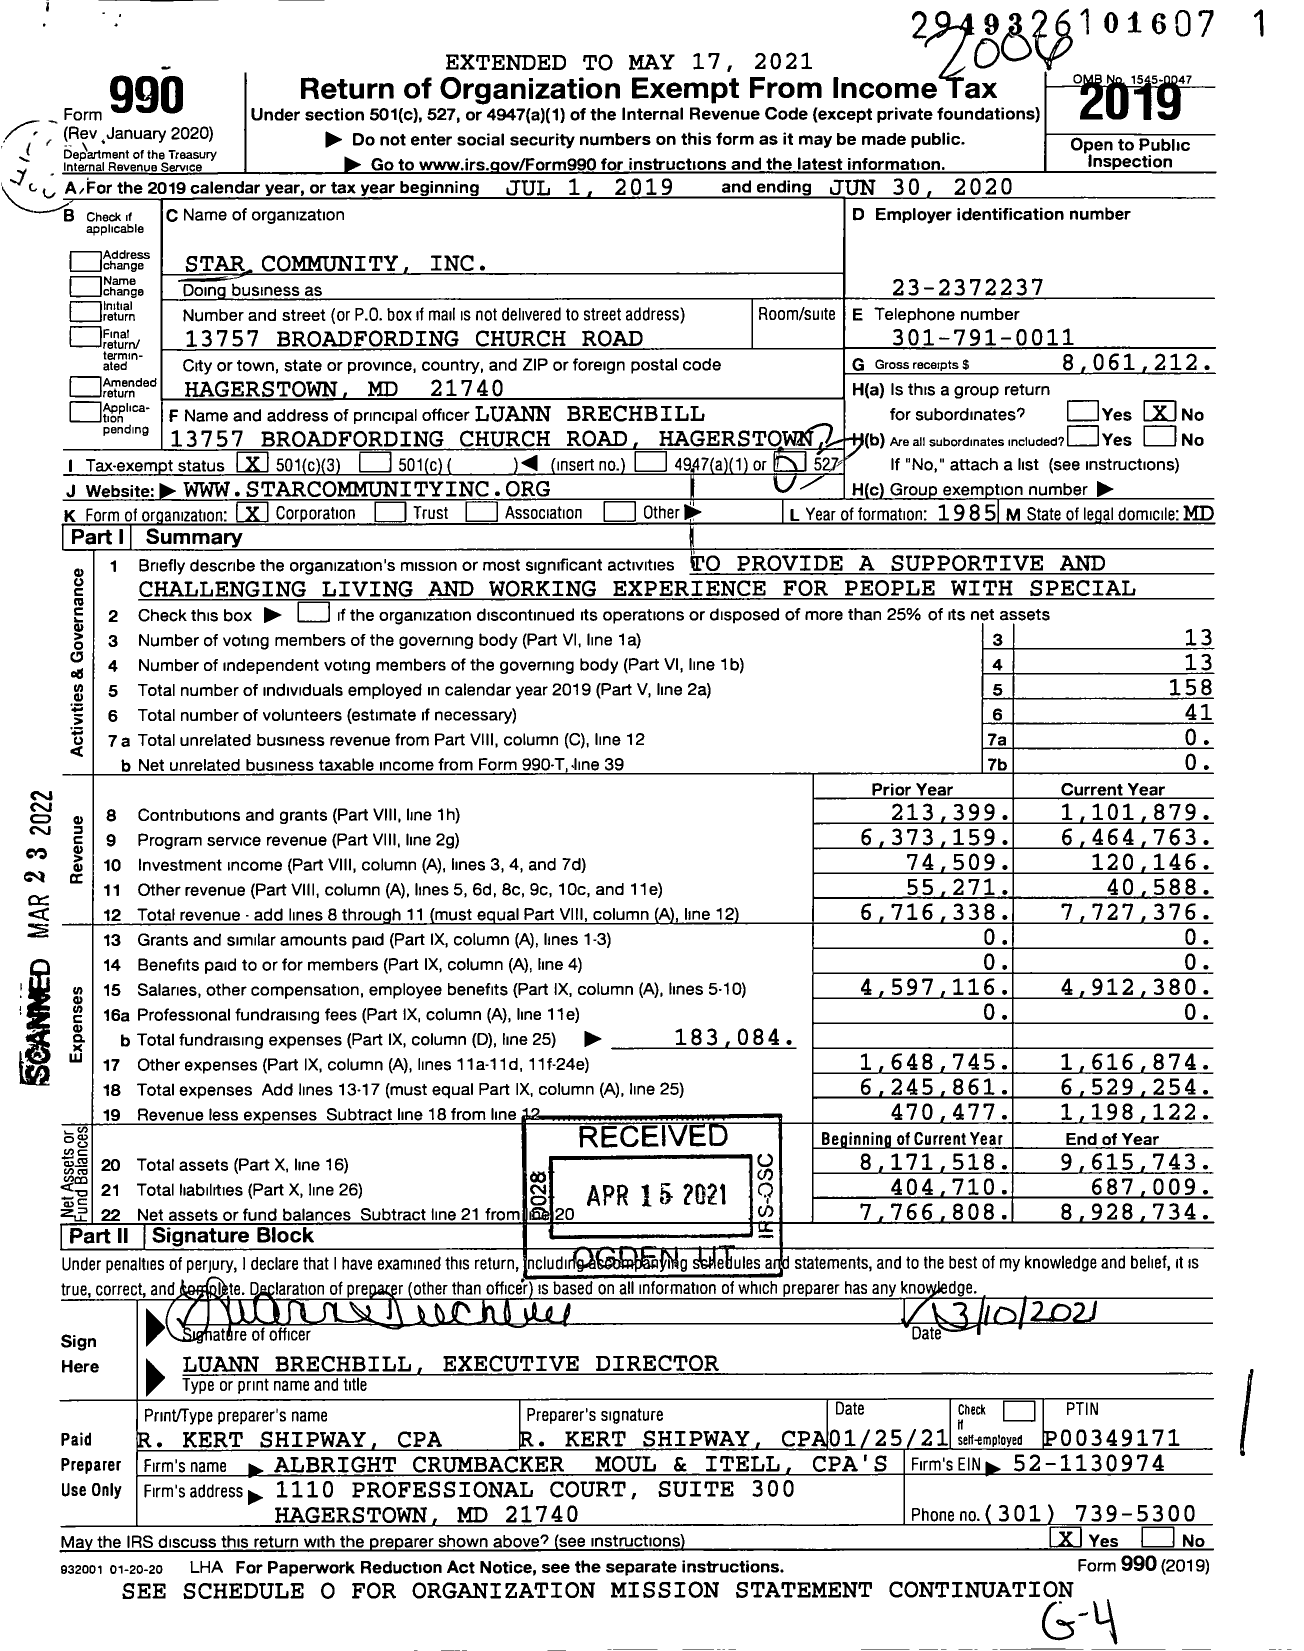 Image of first page of 2019 Form 990 for Star Community